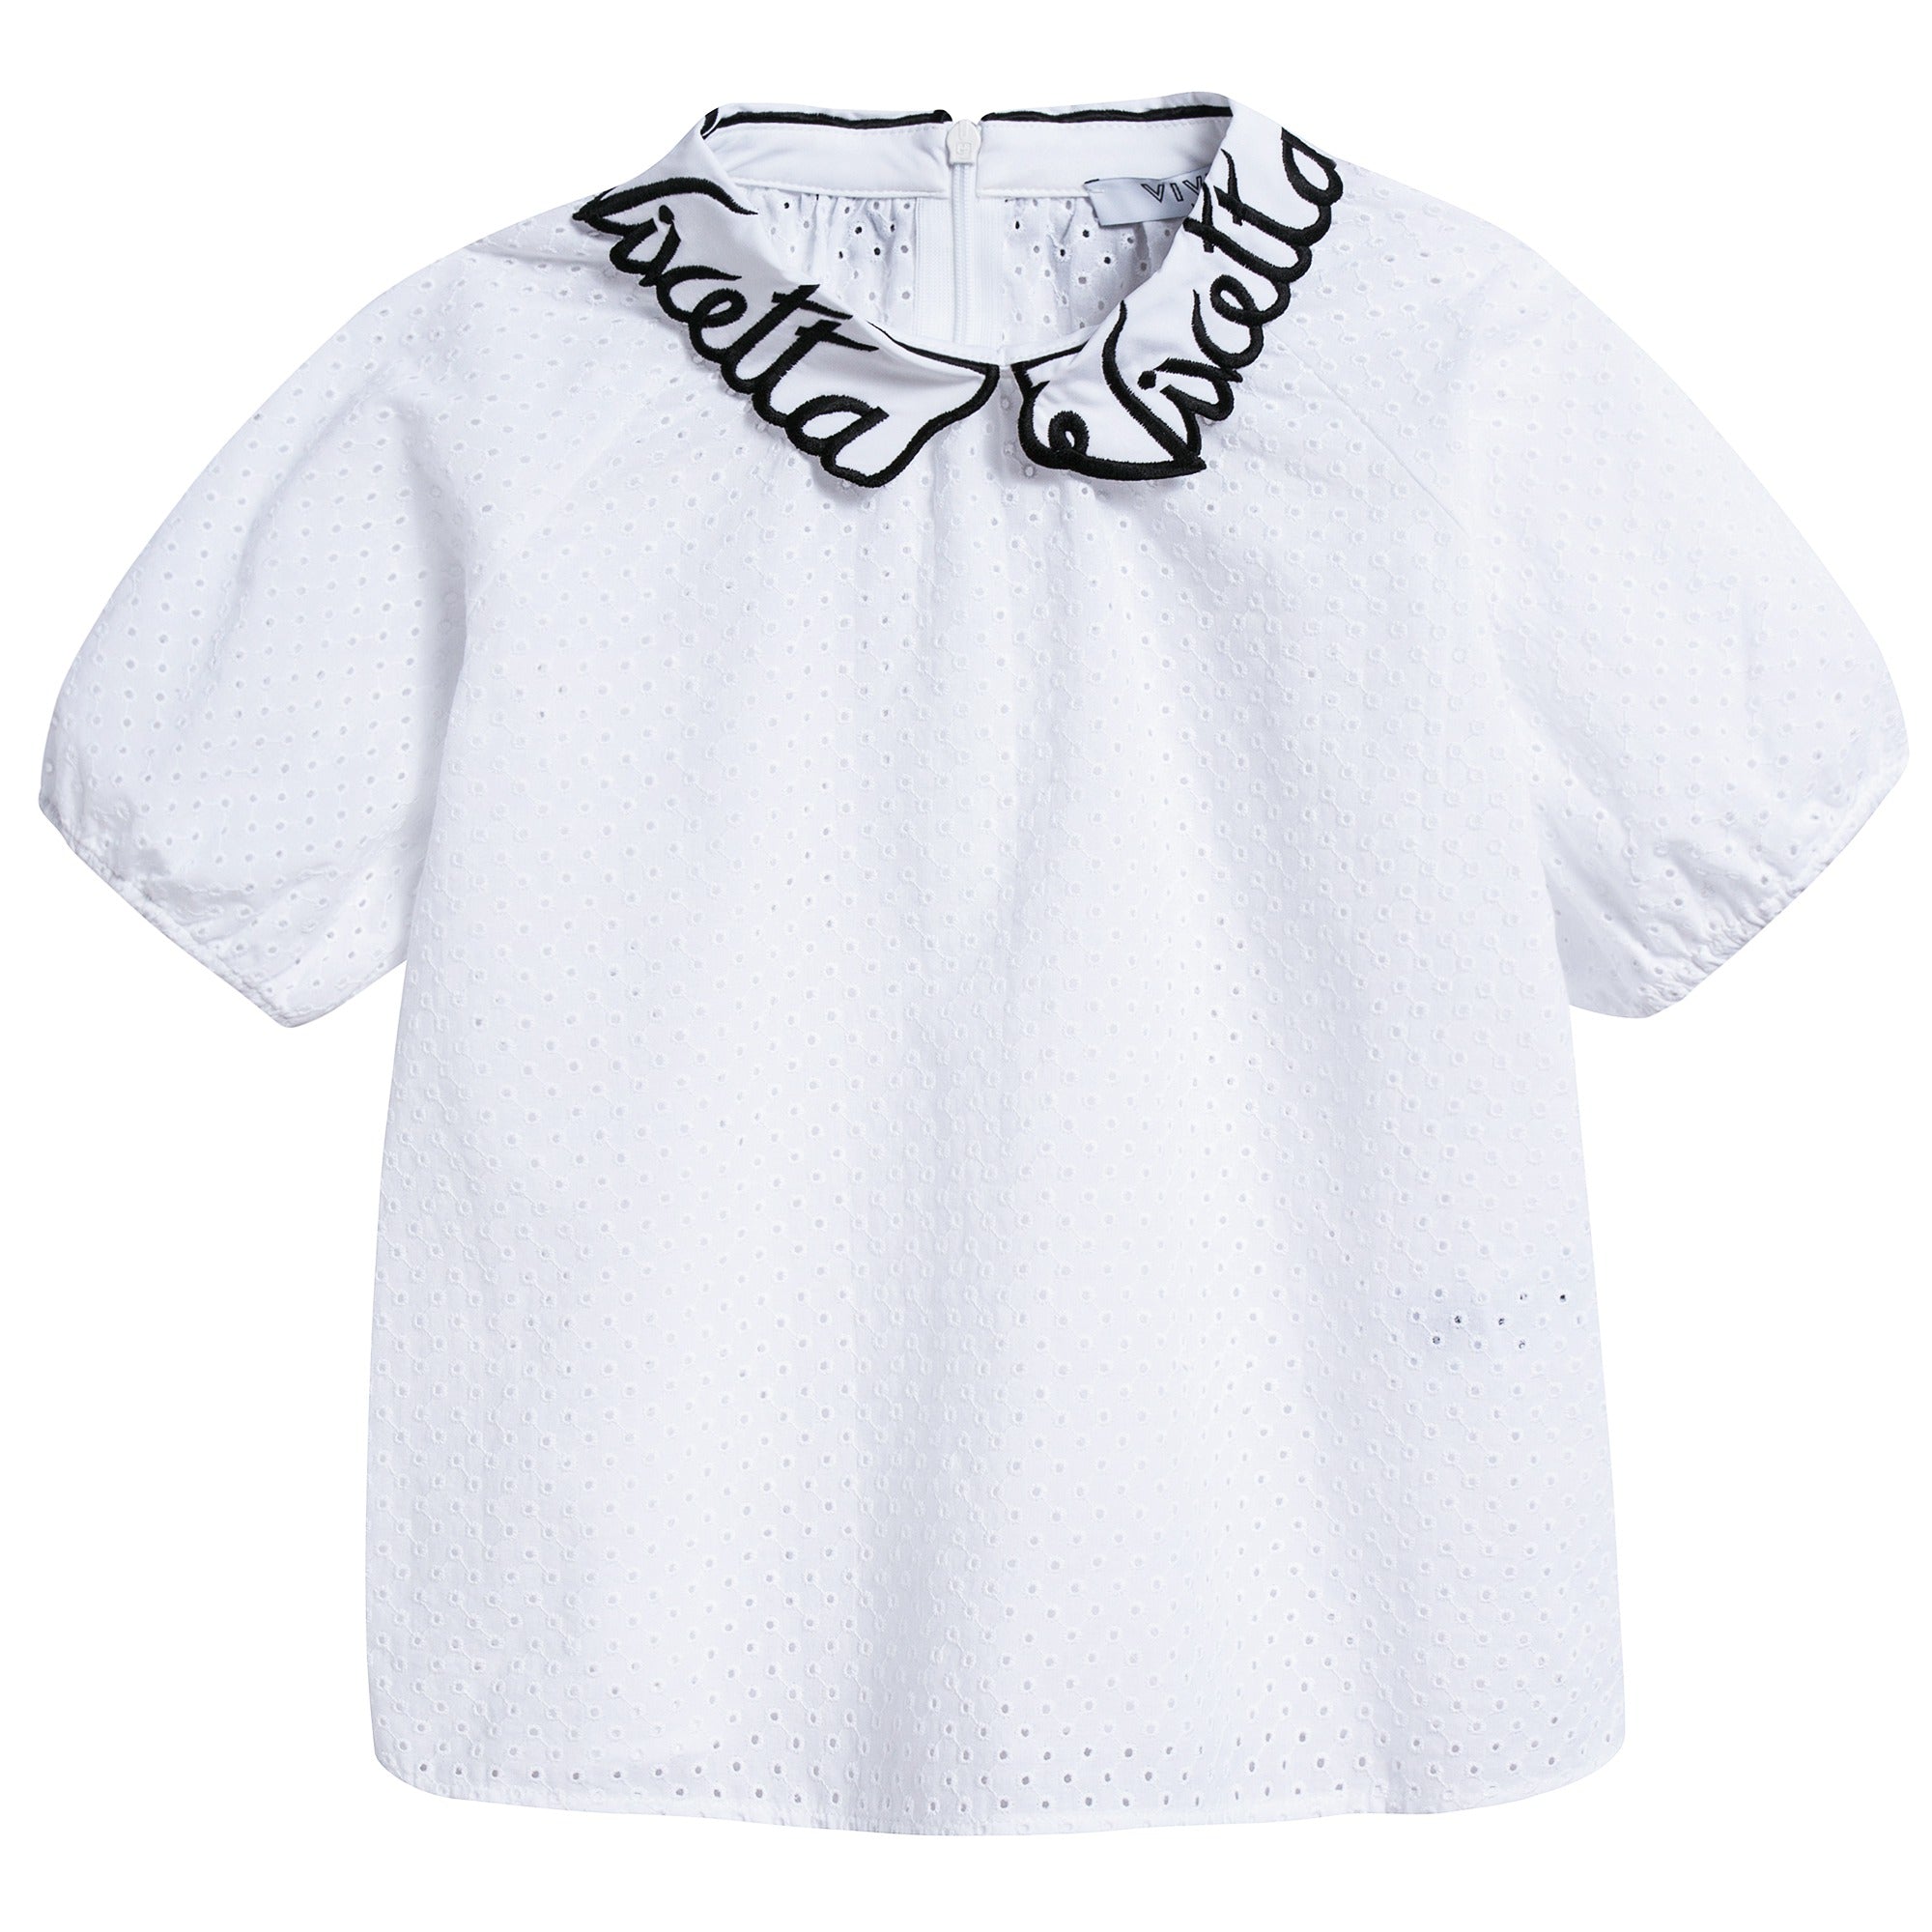 Girls White Collar And Embroidery Cotton Woven Shirt